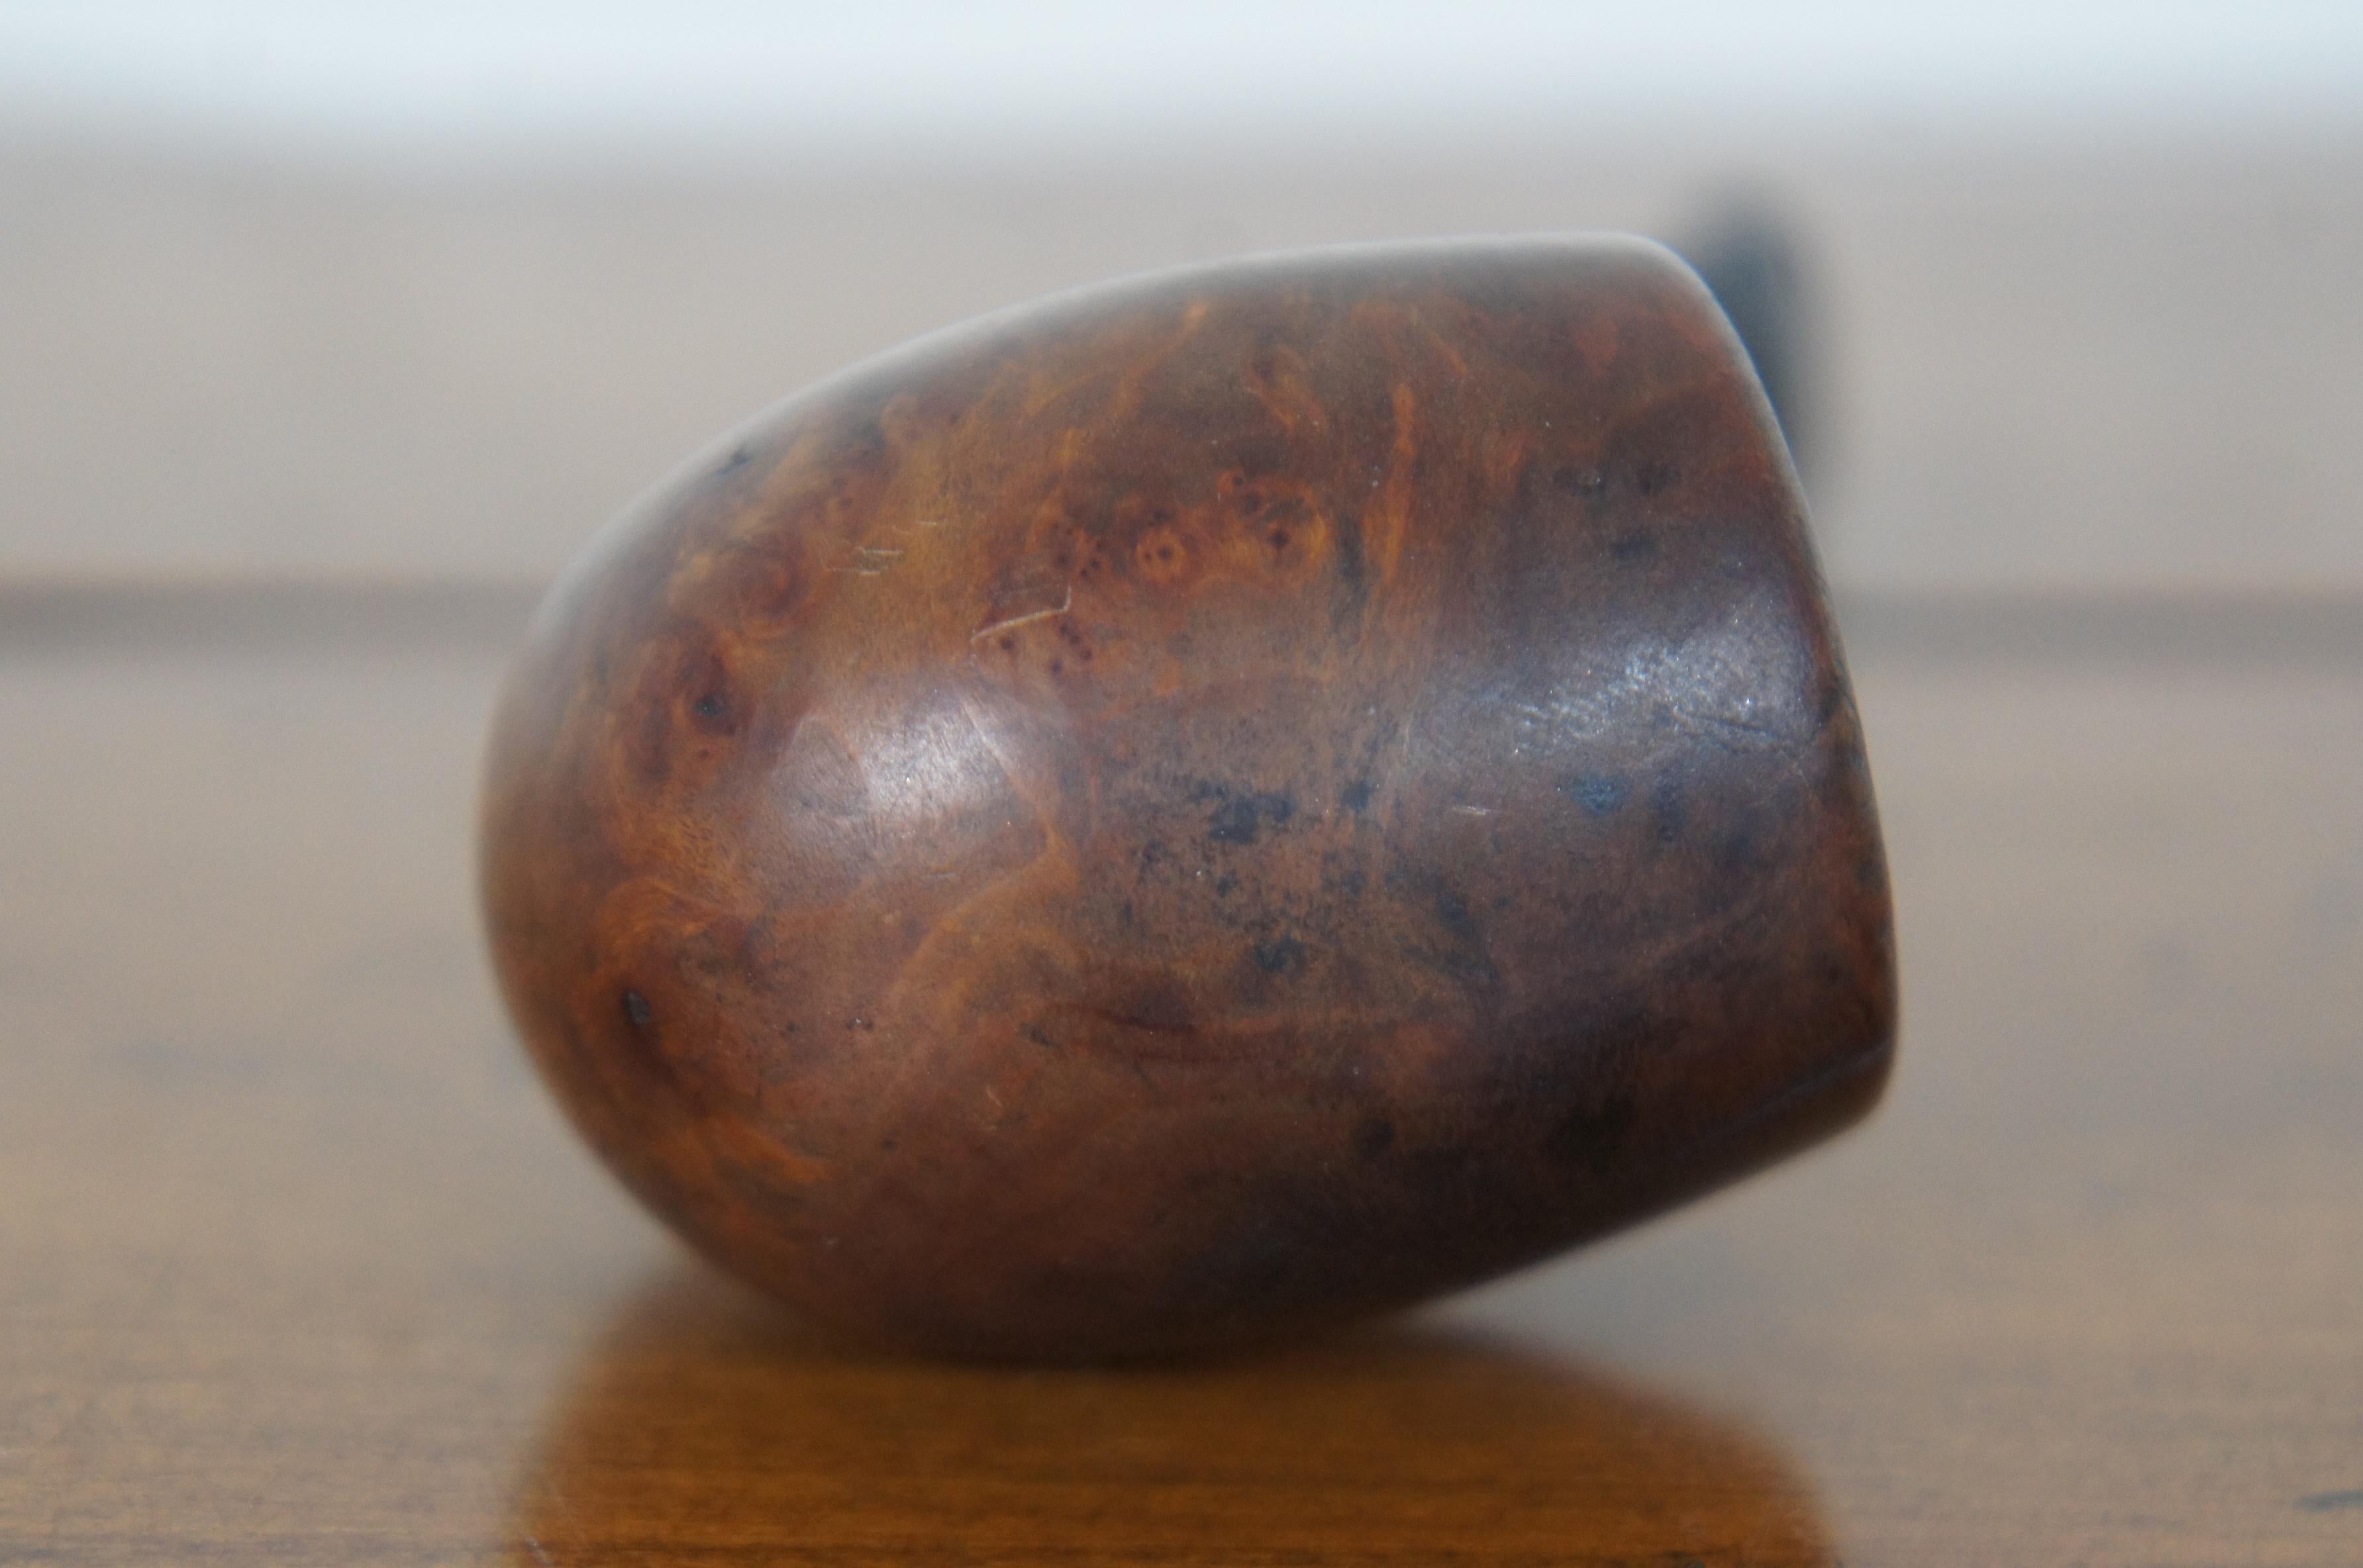 Antique Kaywoodie Drinkless Burlwood Smoking Tobacco Sherlock Pipe KBB Clover In Good Condition For Sale In Dayton, OH